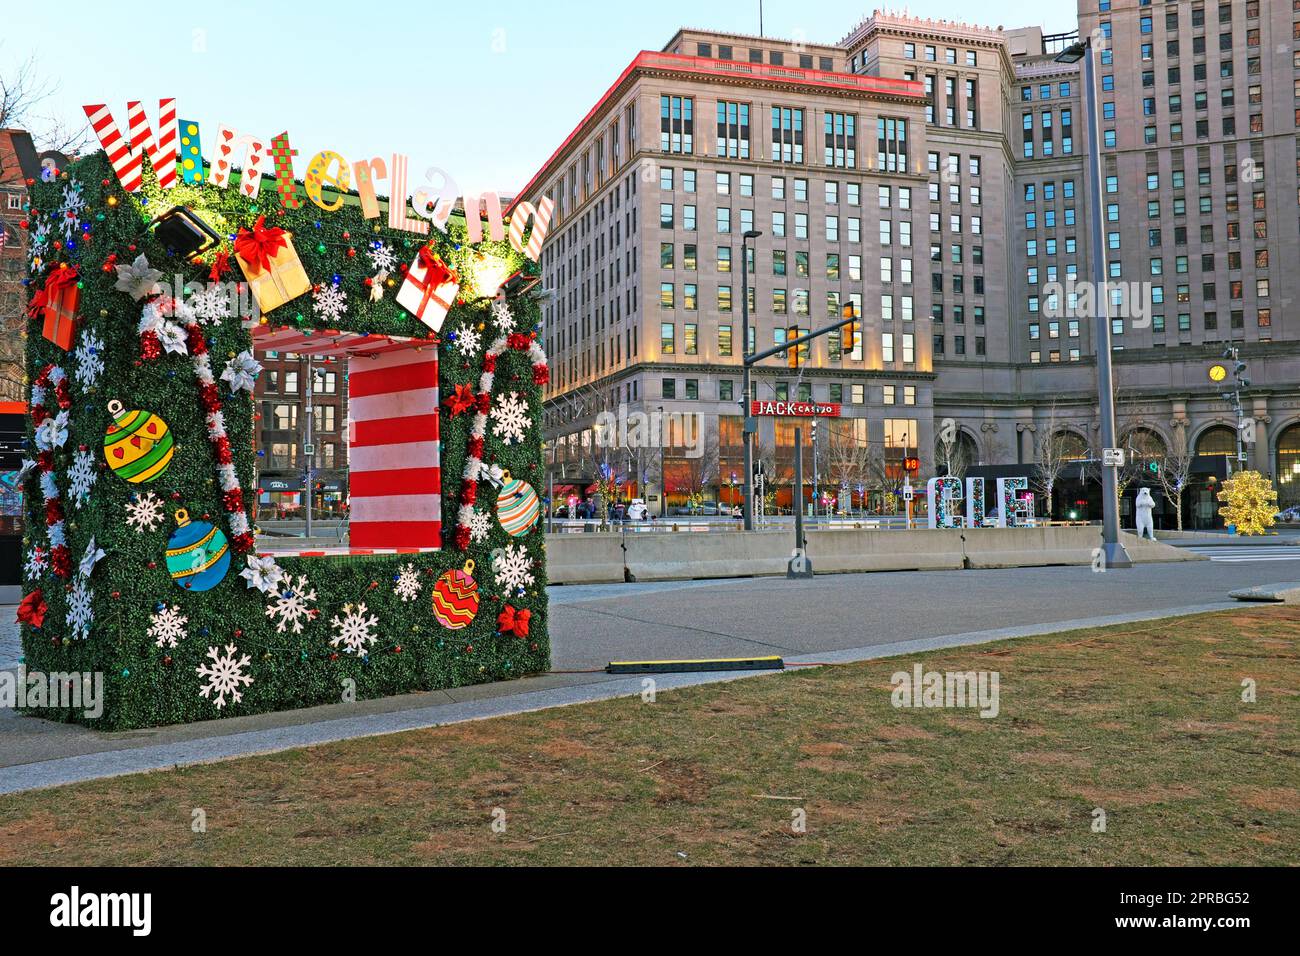 Cleveland Public Square in downtown Cleveland, Ohio with its winter season decorations but without snow. Stock Photo